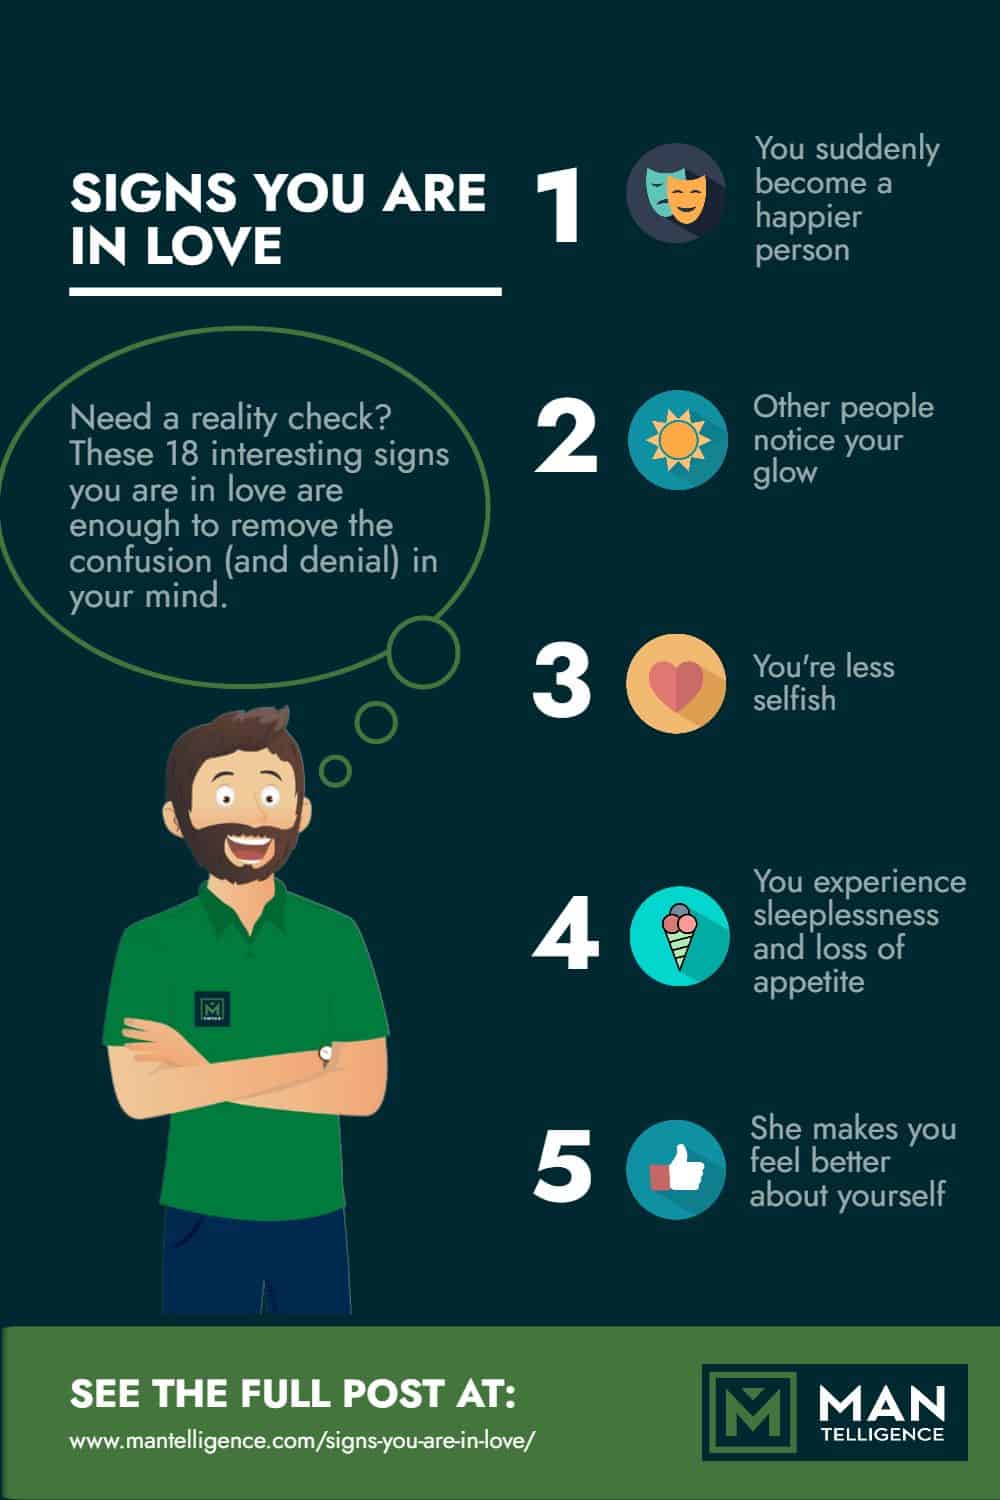 Signs You Are In Love - Infographic